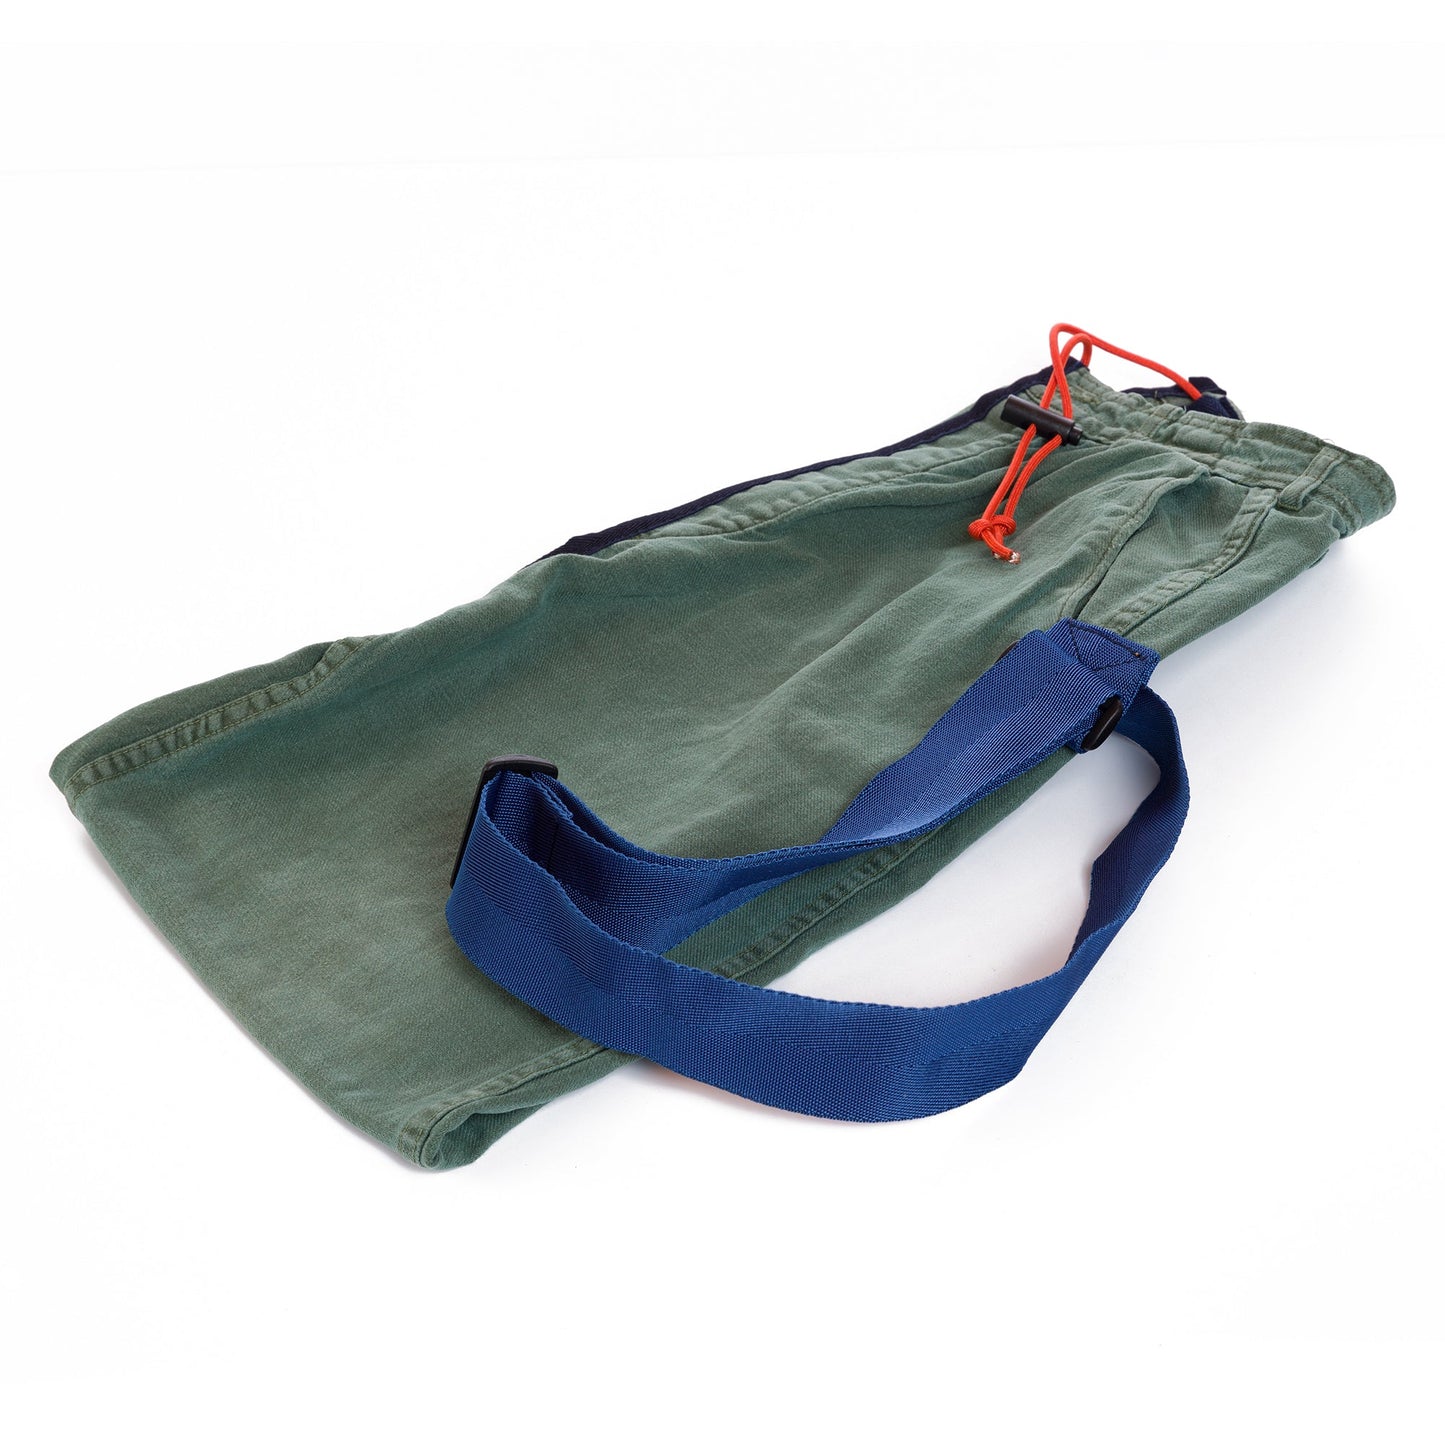 Jeanius - Camping Chair Bag - was £30 now £20!